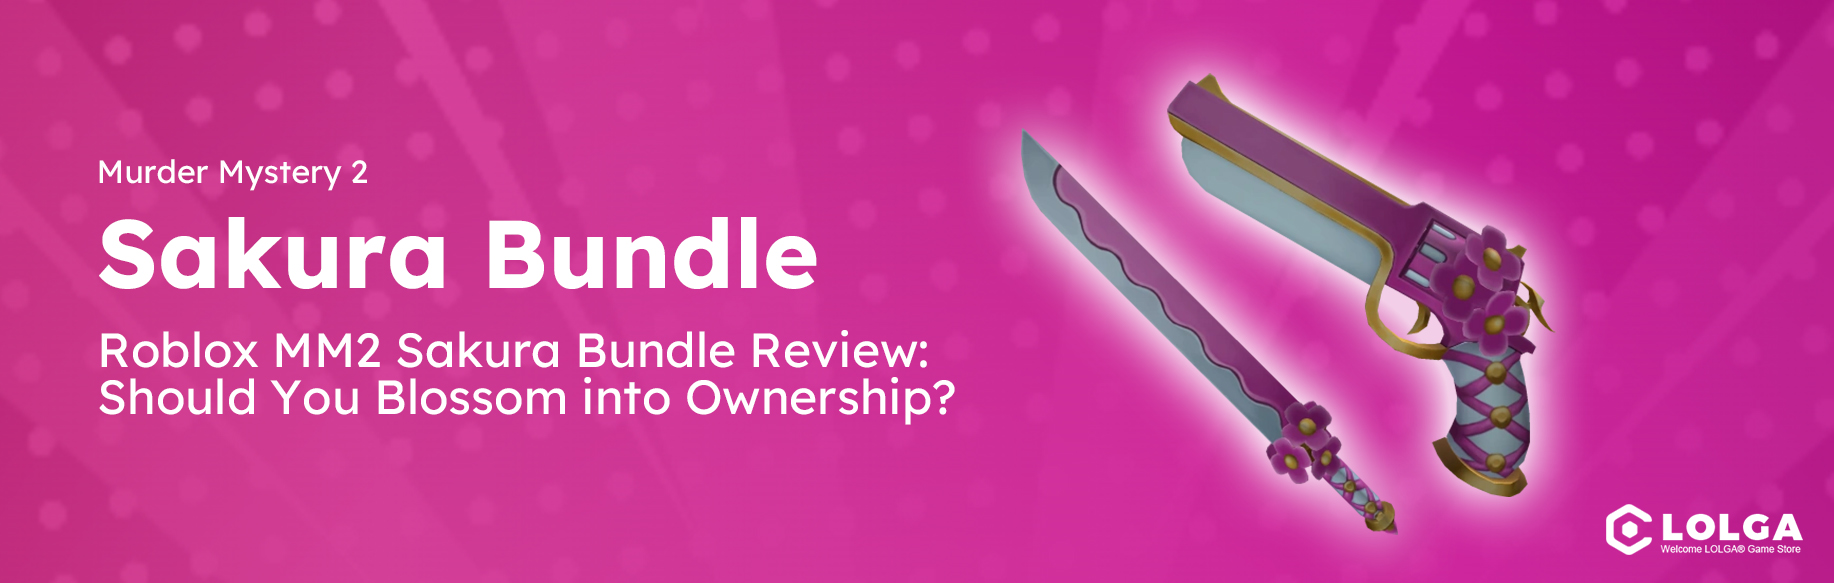 Roblox MM2 Sakura Bundle Review: Should You Blossom into Ownership?